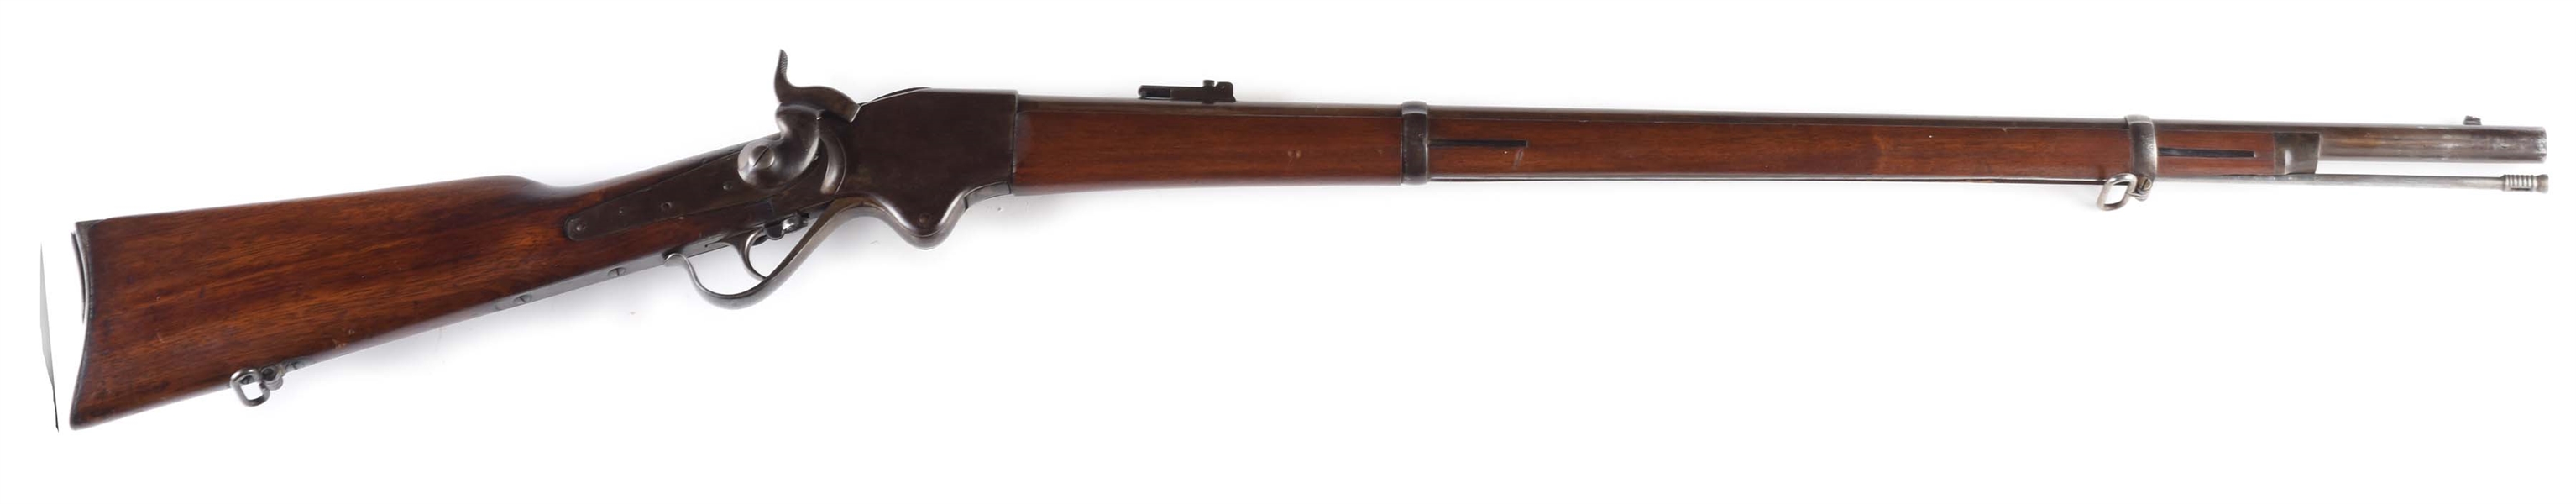 (A) BURNSIDE RIFLE CO. SPENCER MODEL 1865 LEVER ACTION RIFLE.